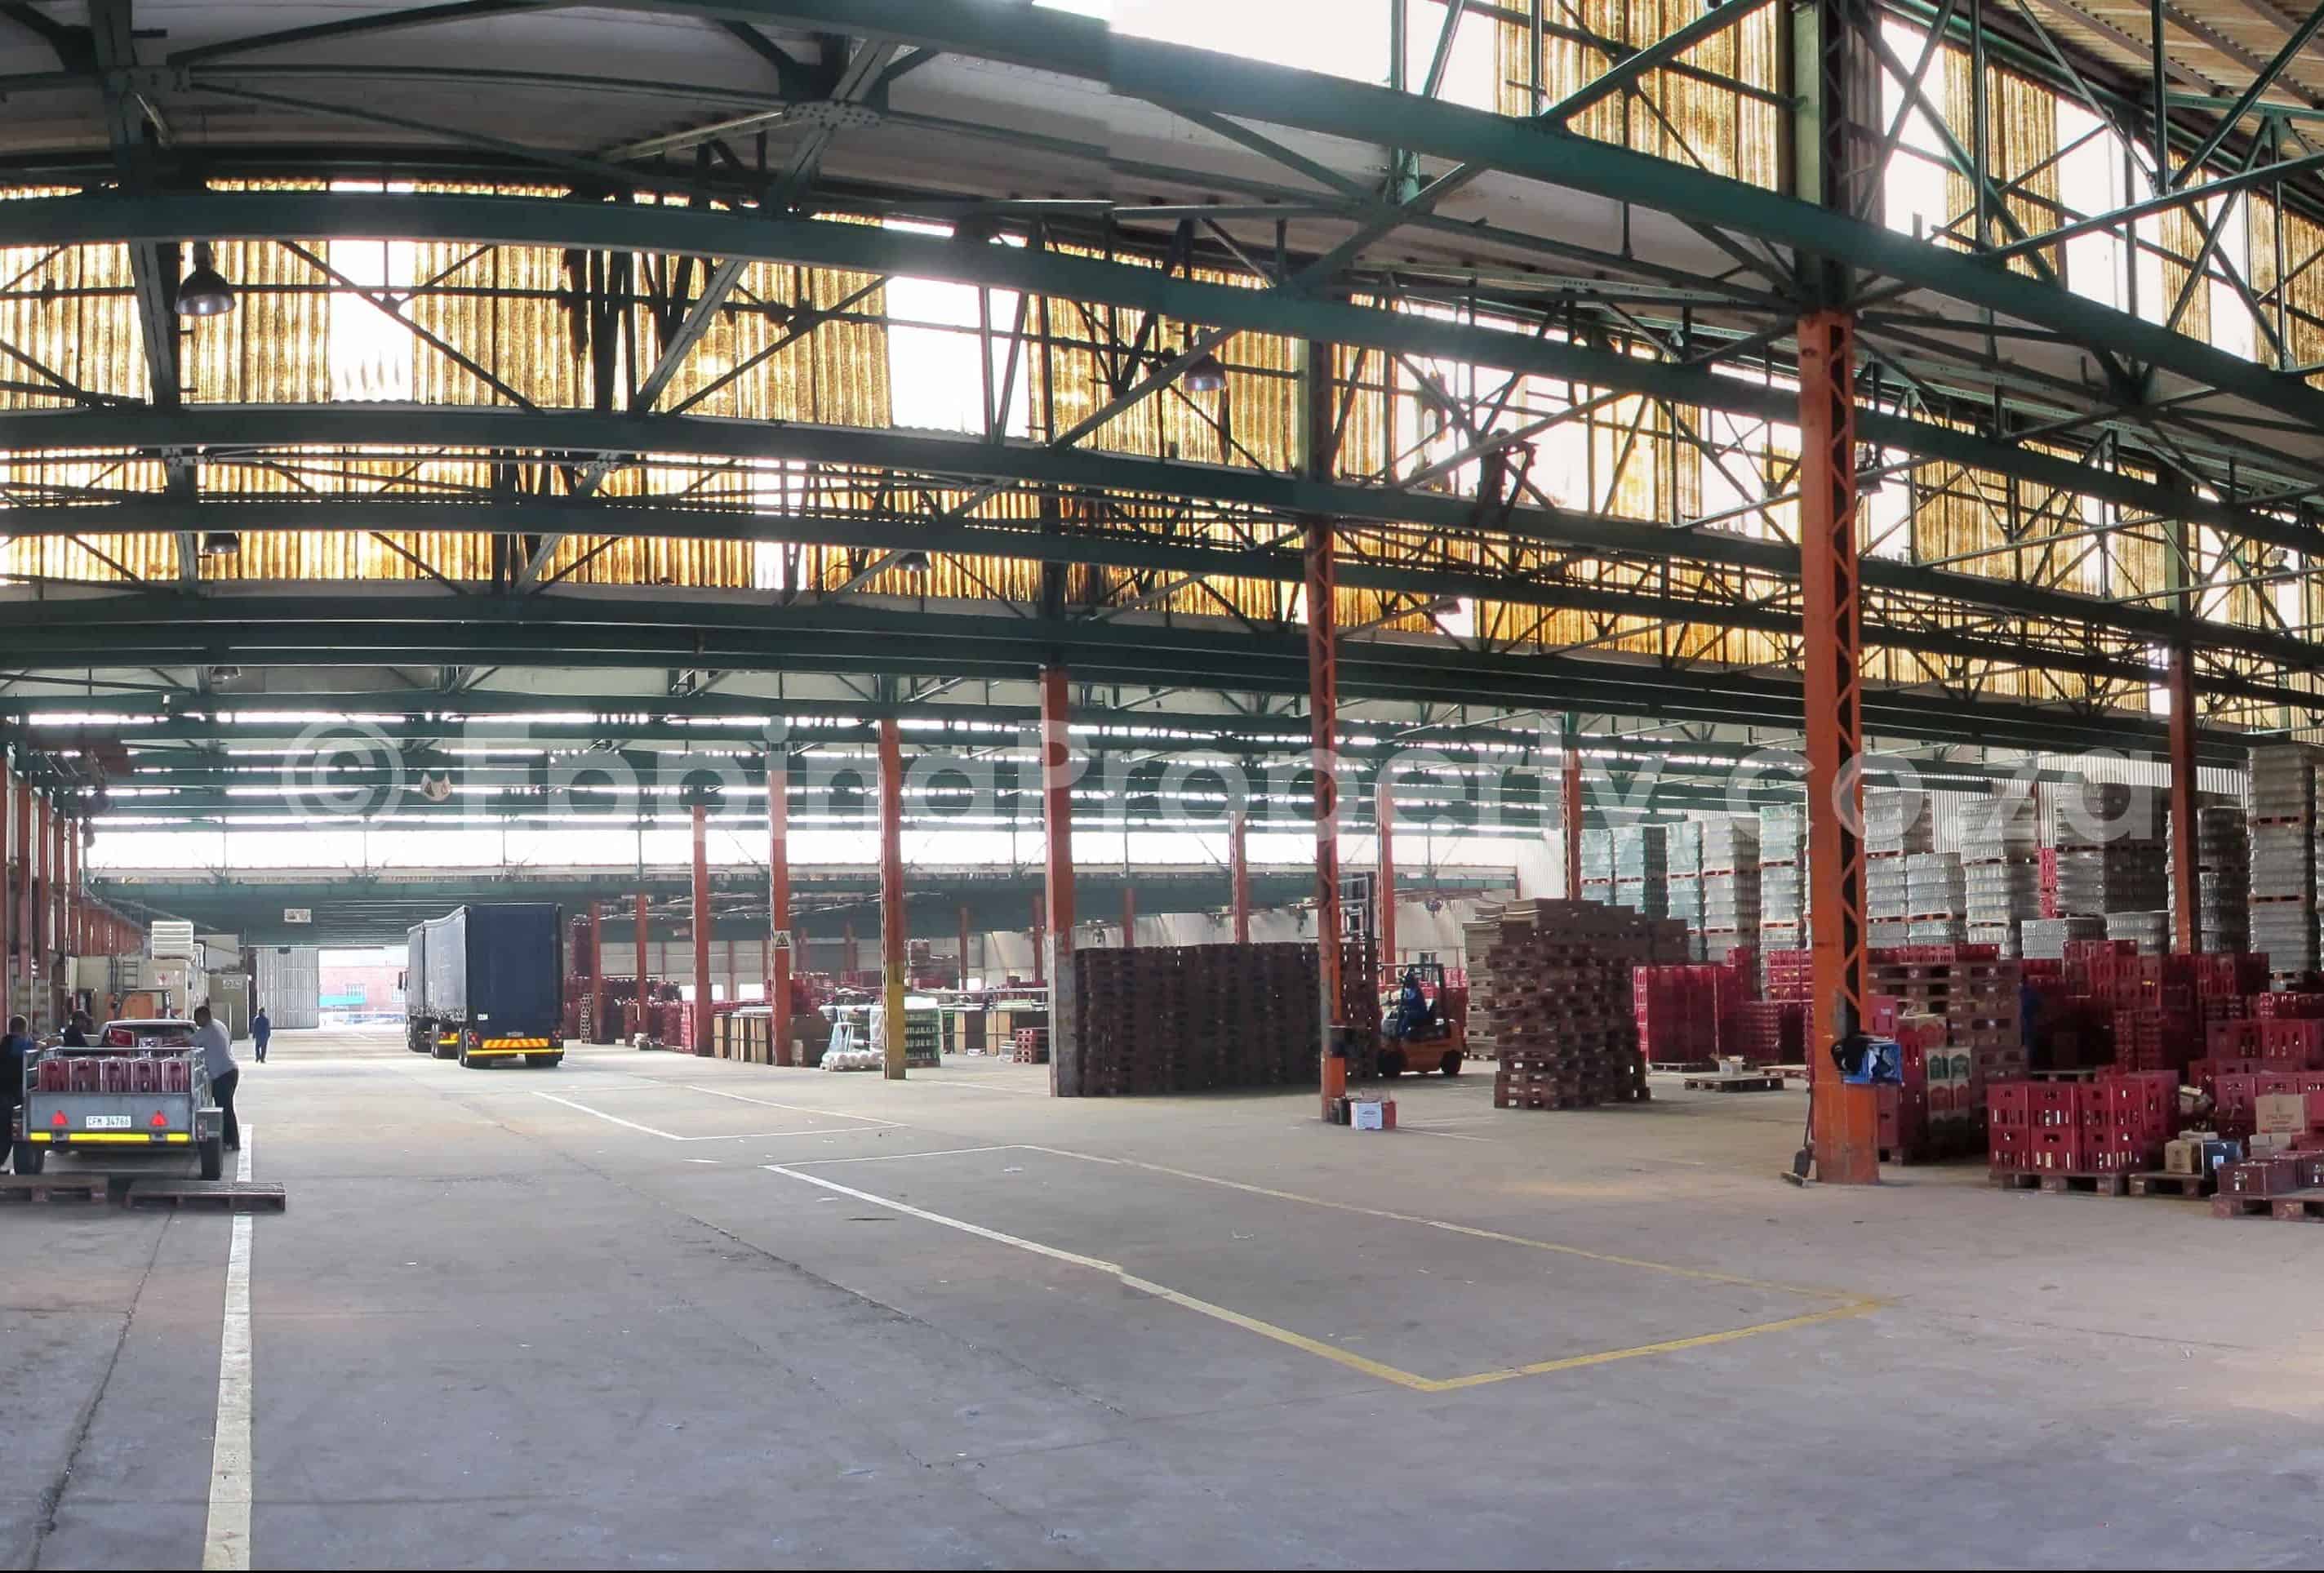 Warehouse to rent close to Epping Avenue